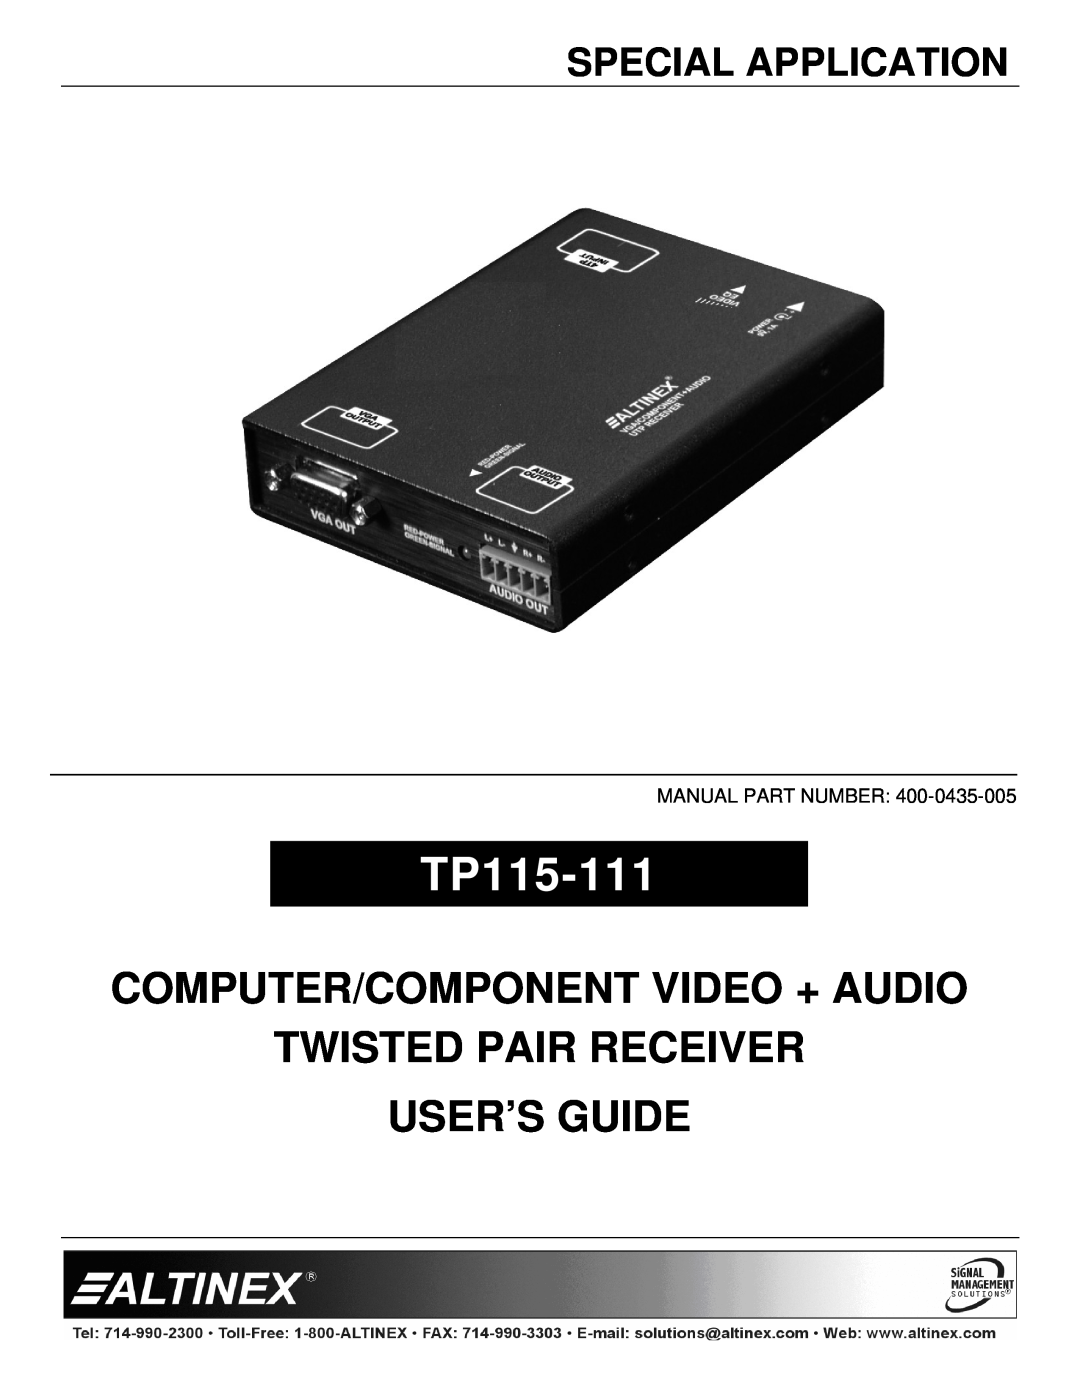 Altinex TP115-111 manual Special Application, Computer/Component Video + Audio, Twisted Pair Receiver User’S Guide 